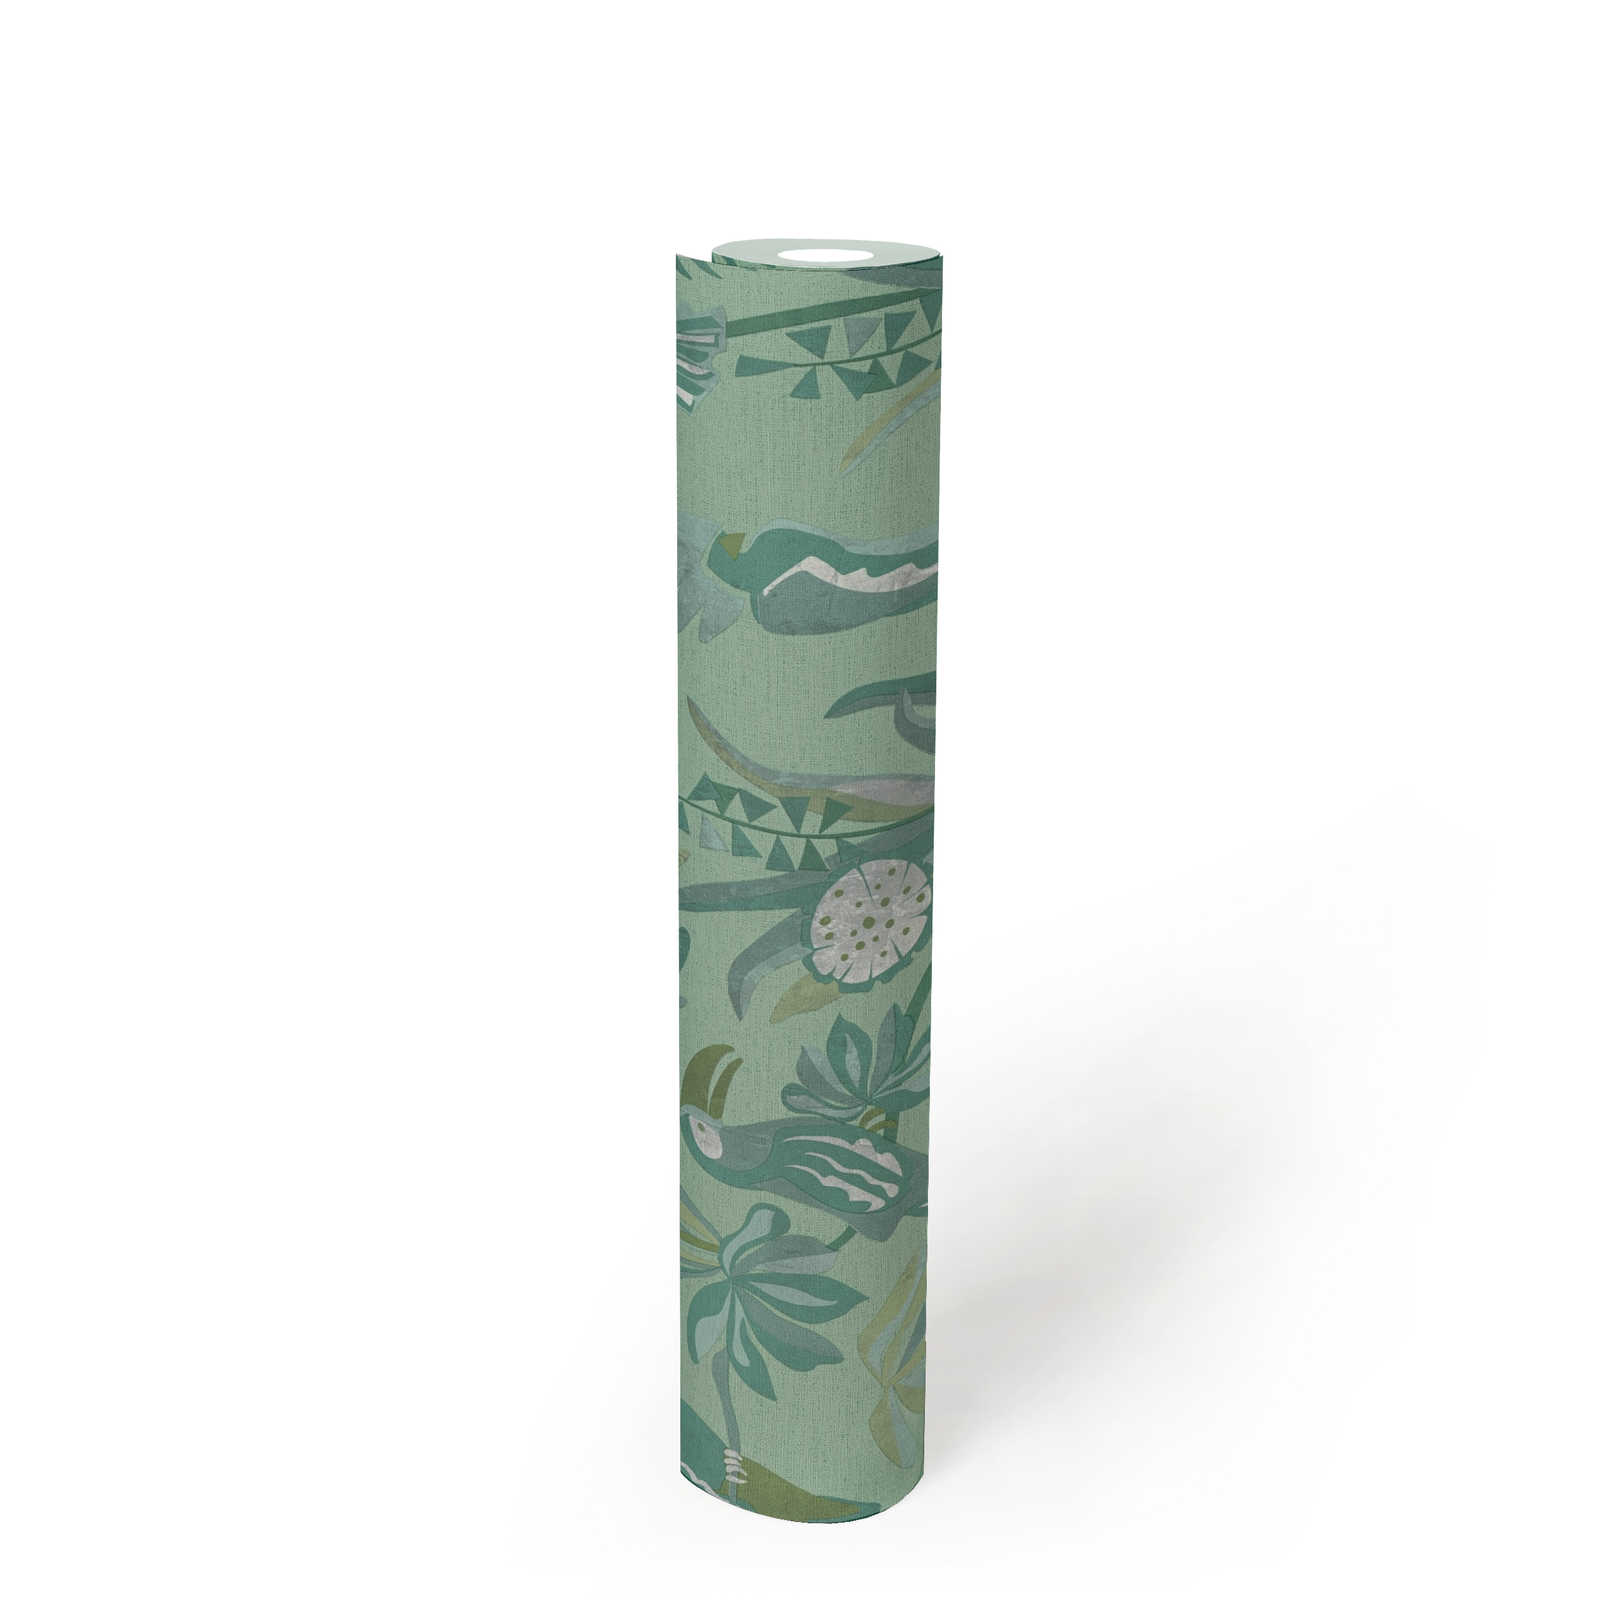             Non-woven wallpaper with jungle motif leaves & birds - green, grey
        